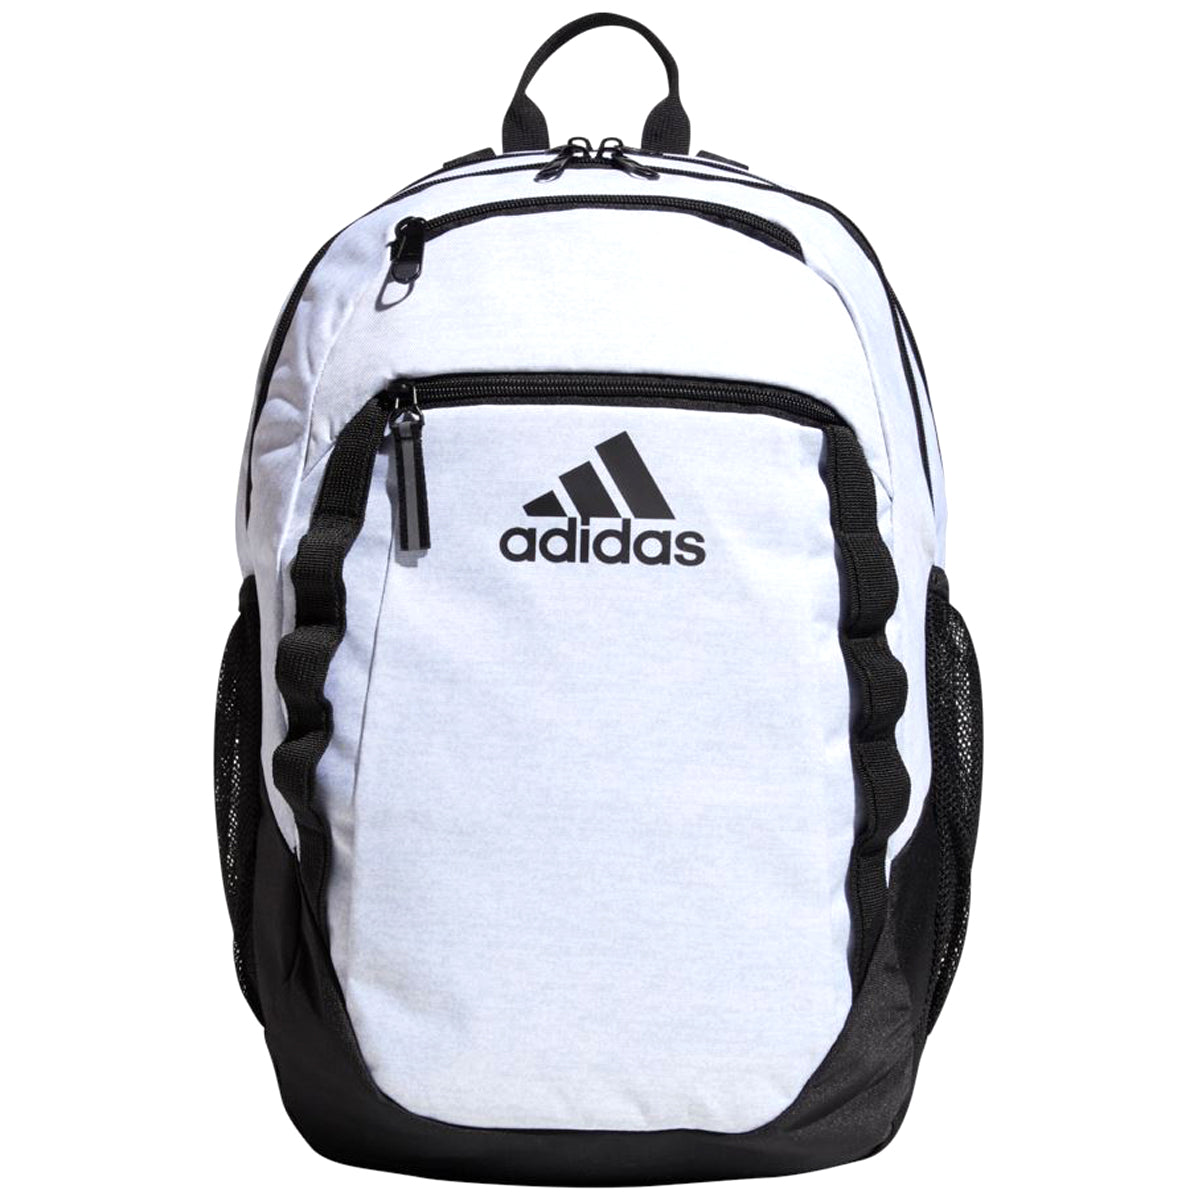 adidas Excel 6 Backpack Bags Adidas JERSEY WHITE OSFA 